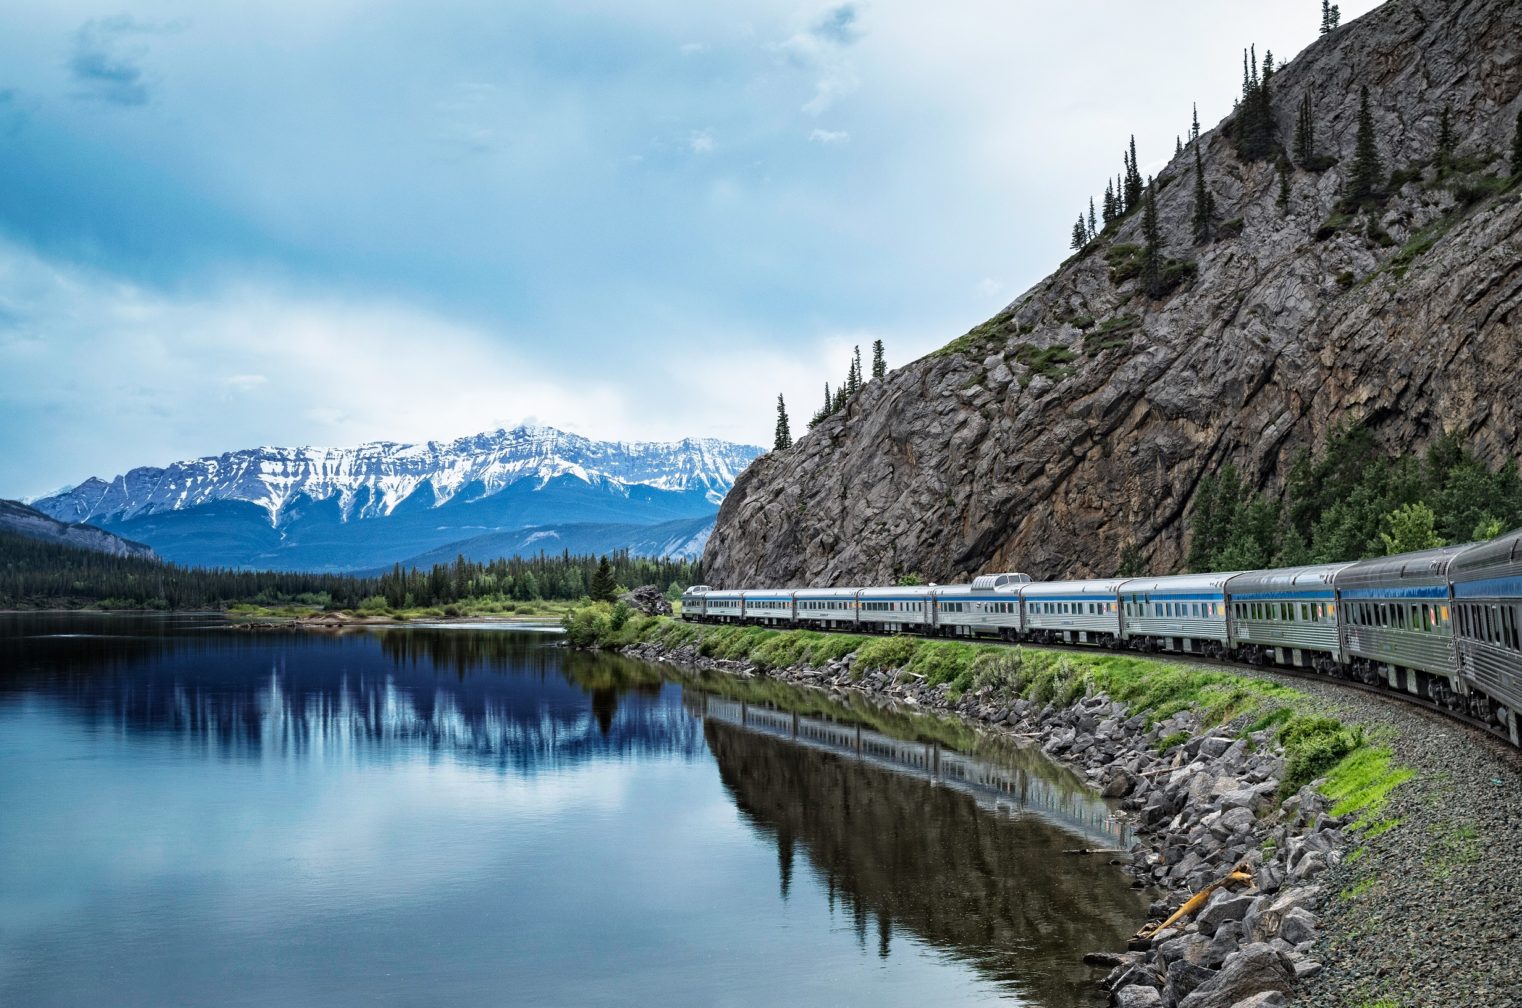 Train passing between a large lake and a mountain